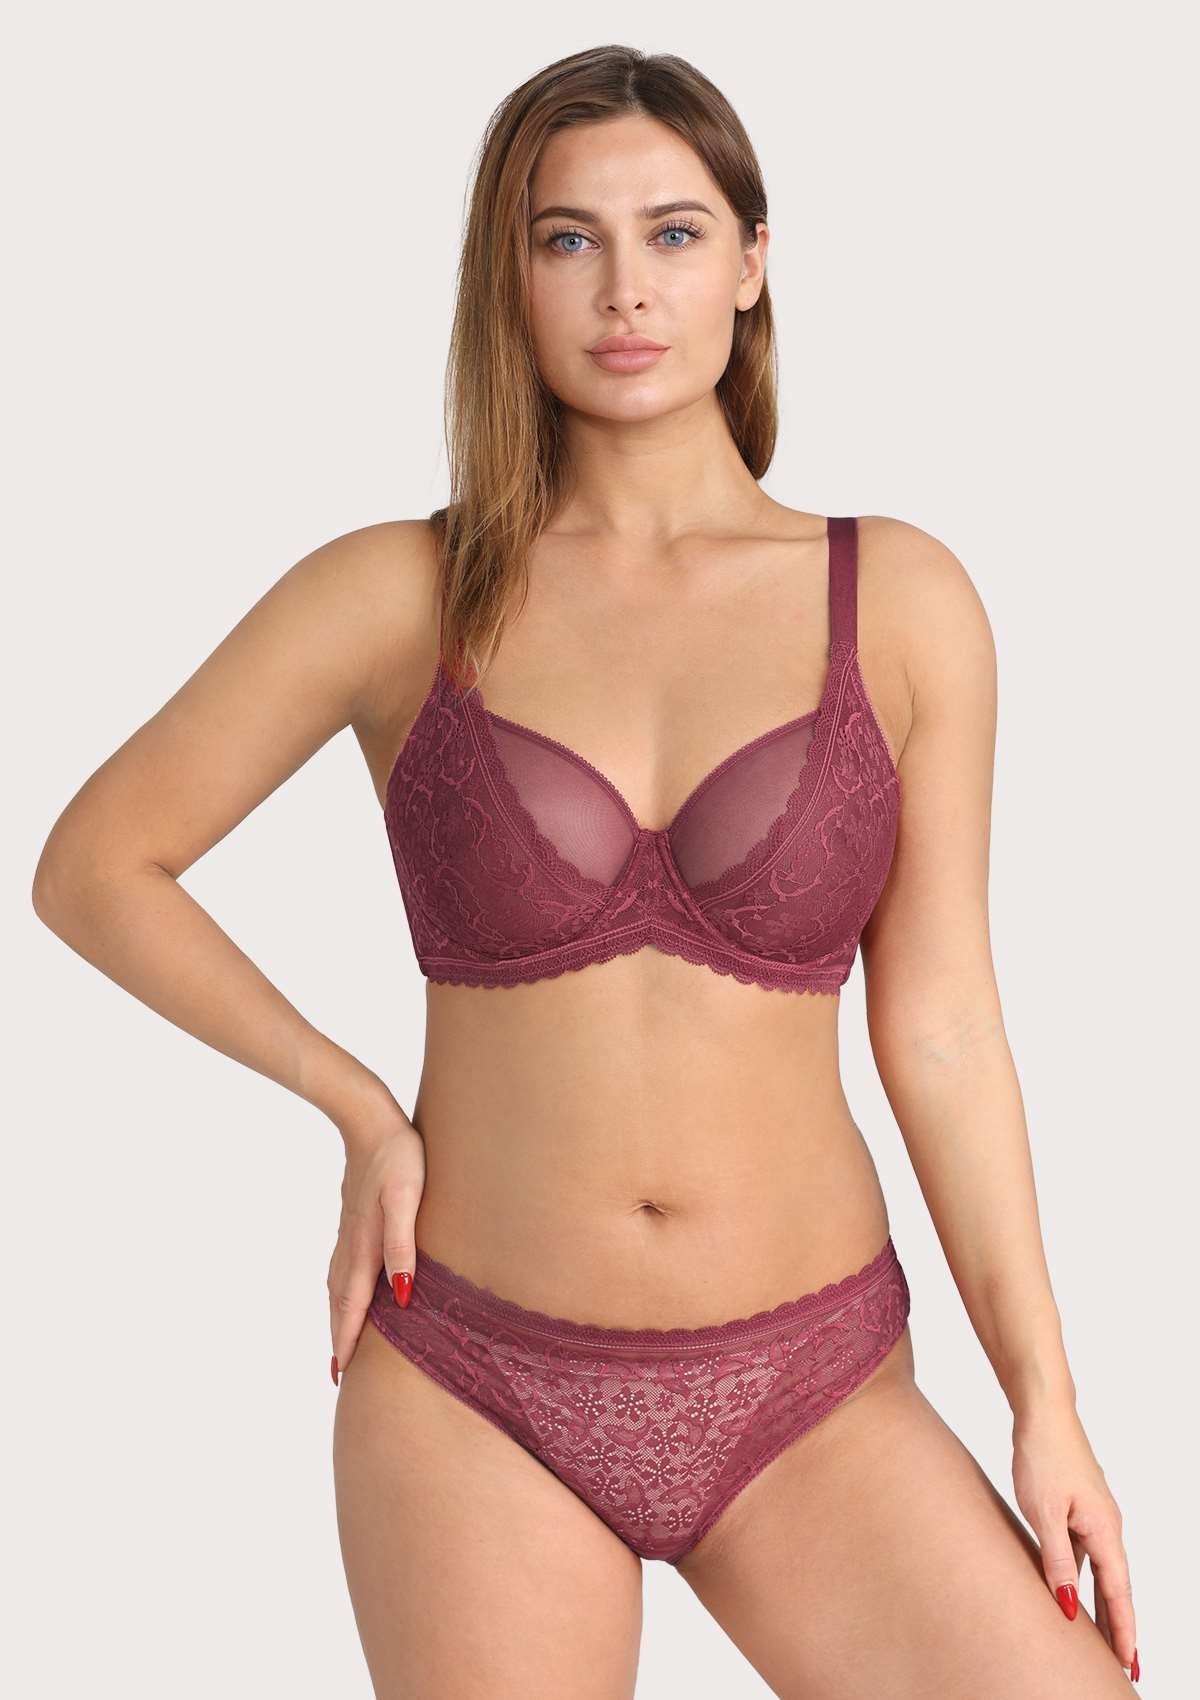 HSIA Anemone Big Bra: Best Bra For Lift And Support, Floral Bra - Burgundy / 36 / C